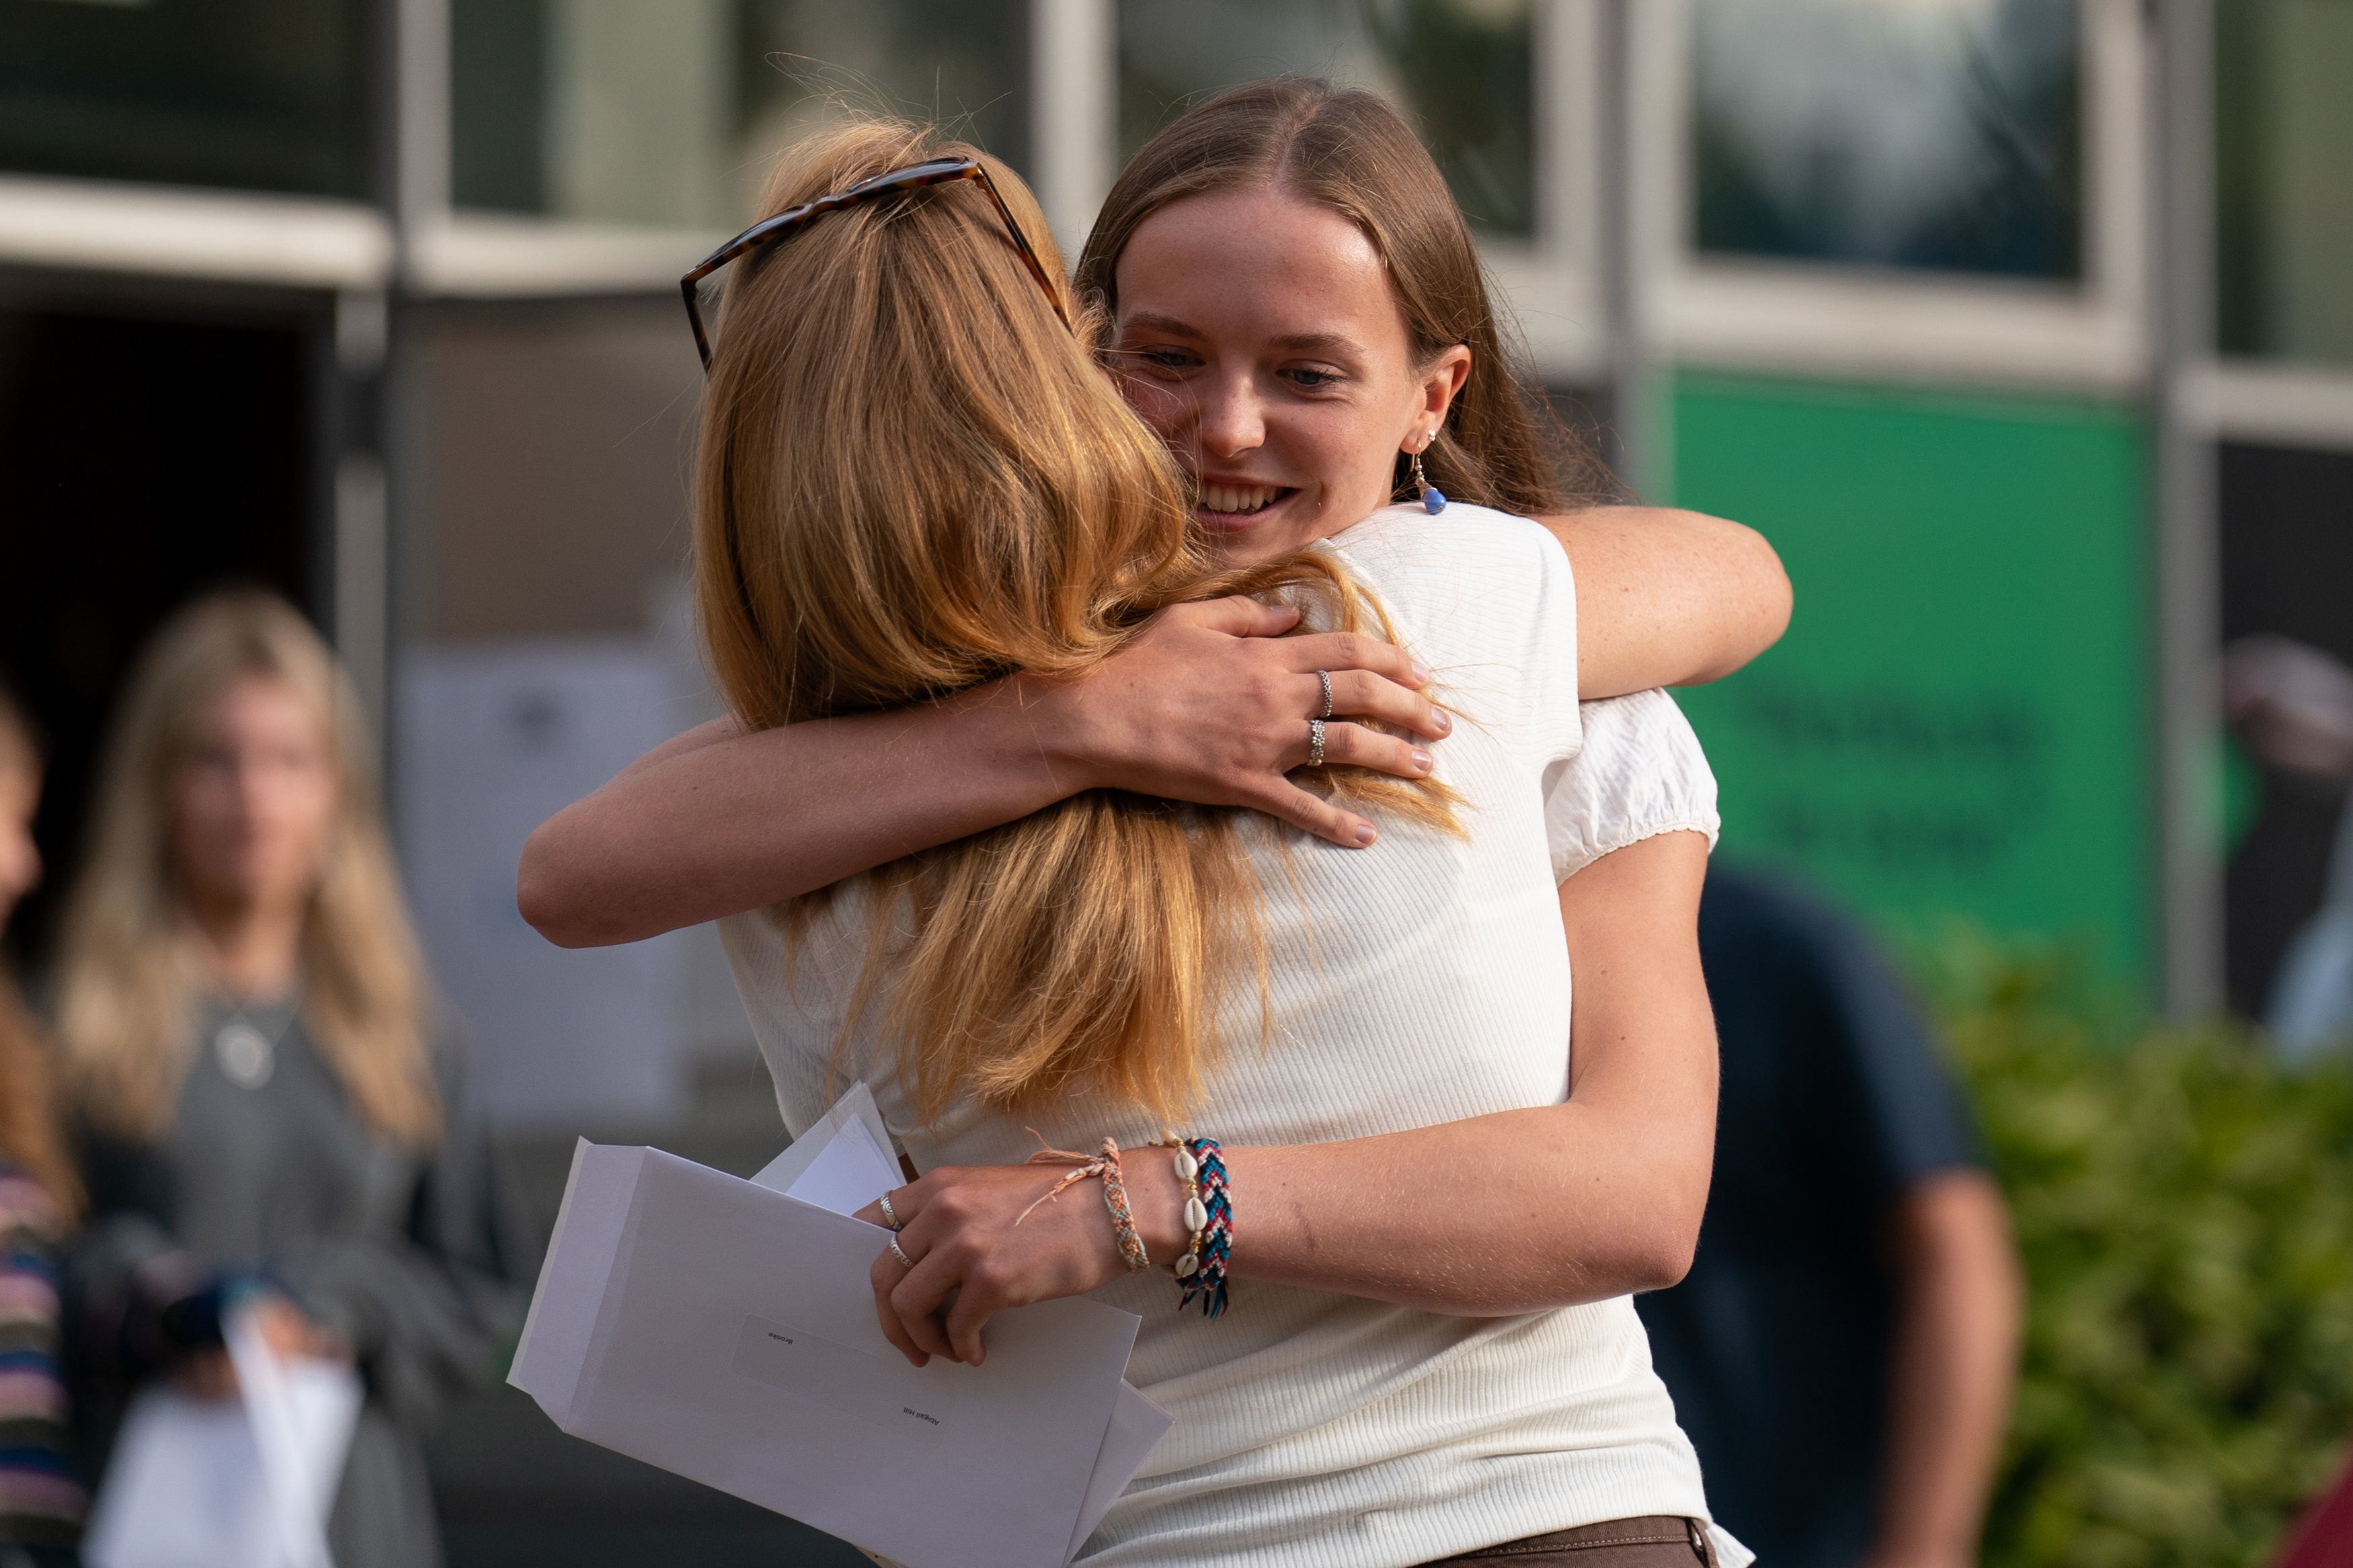 Students received A-level exam results on Thursday after weeks of waiting